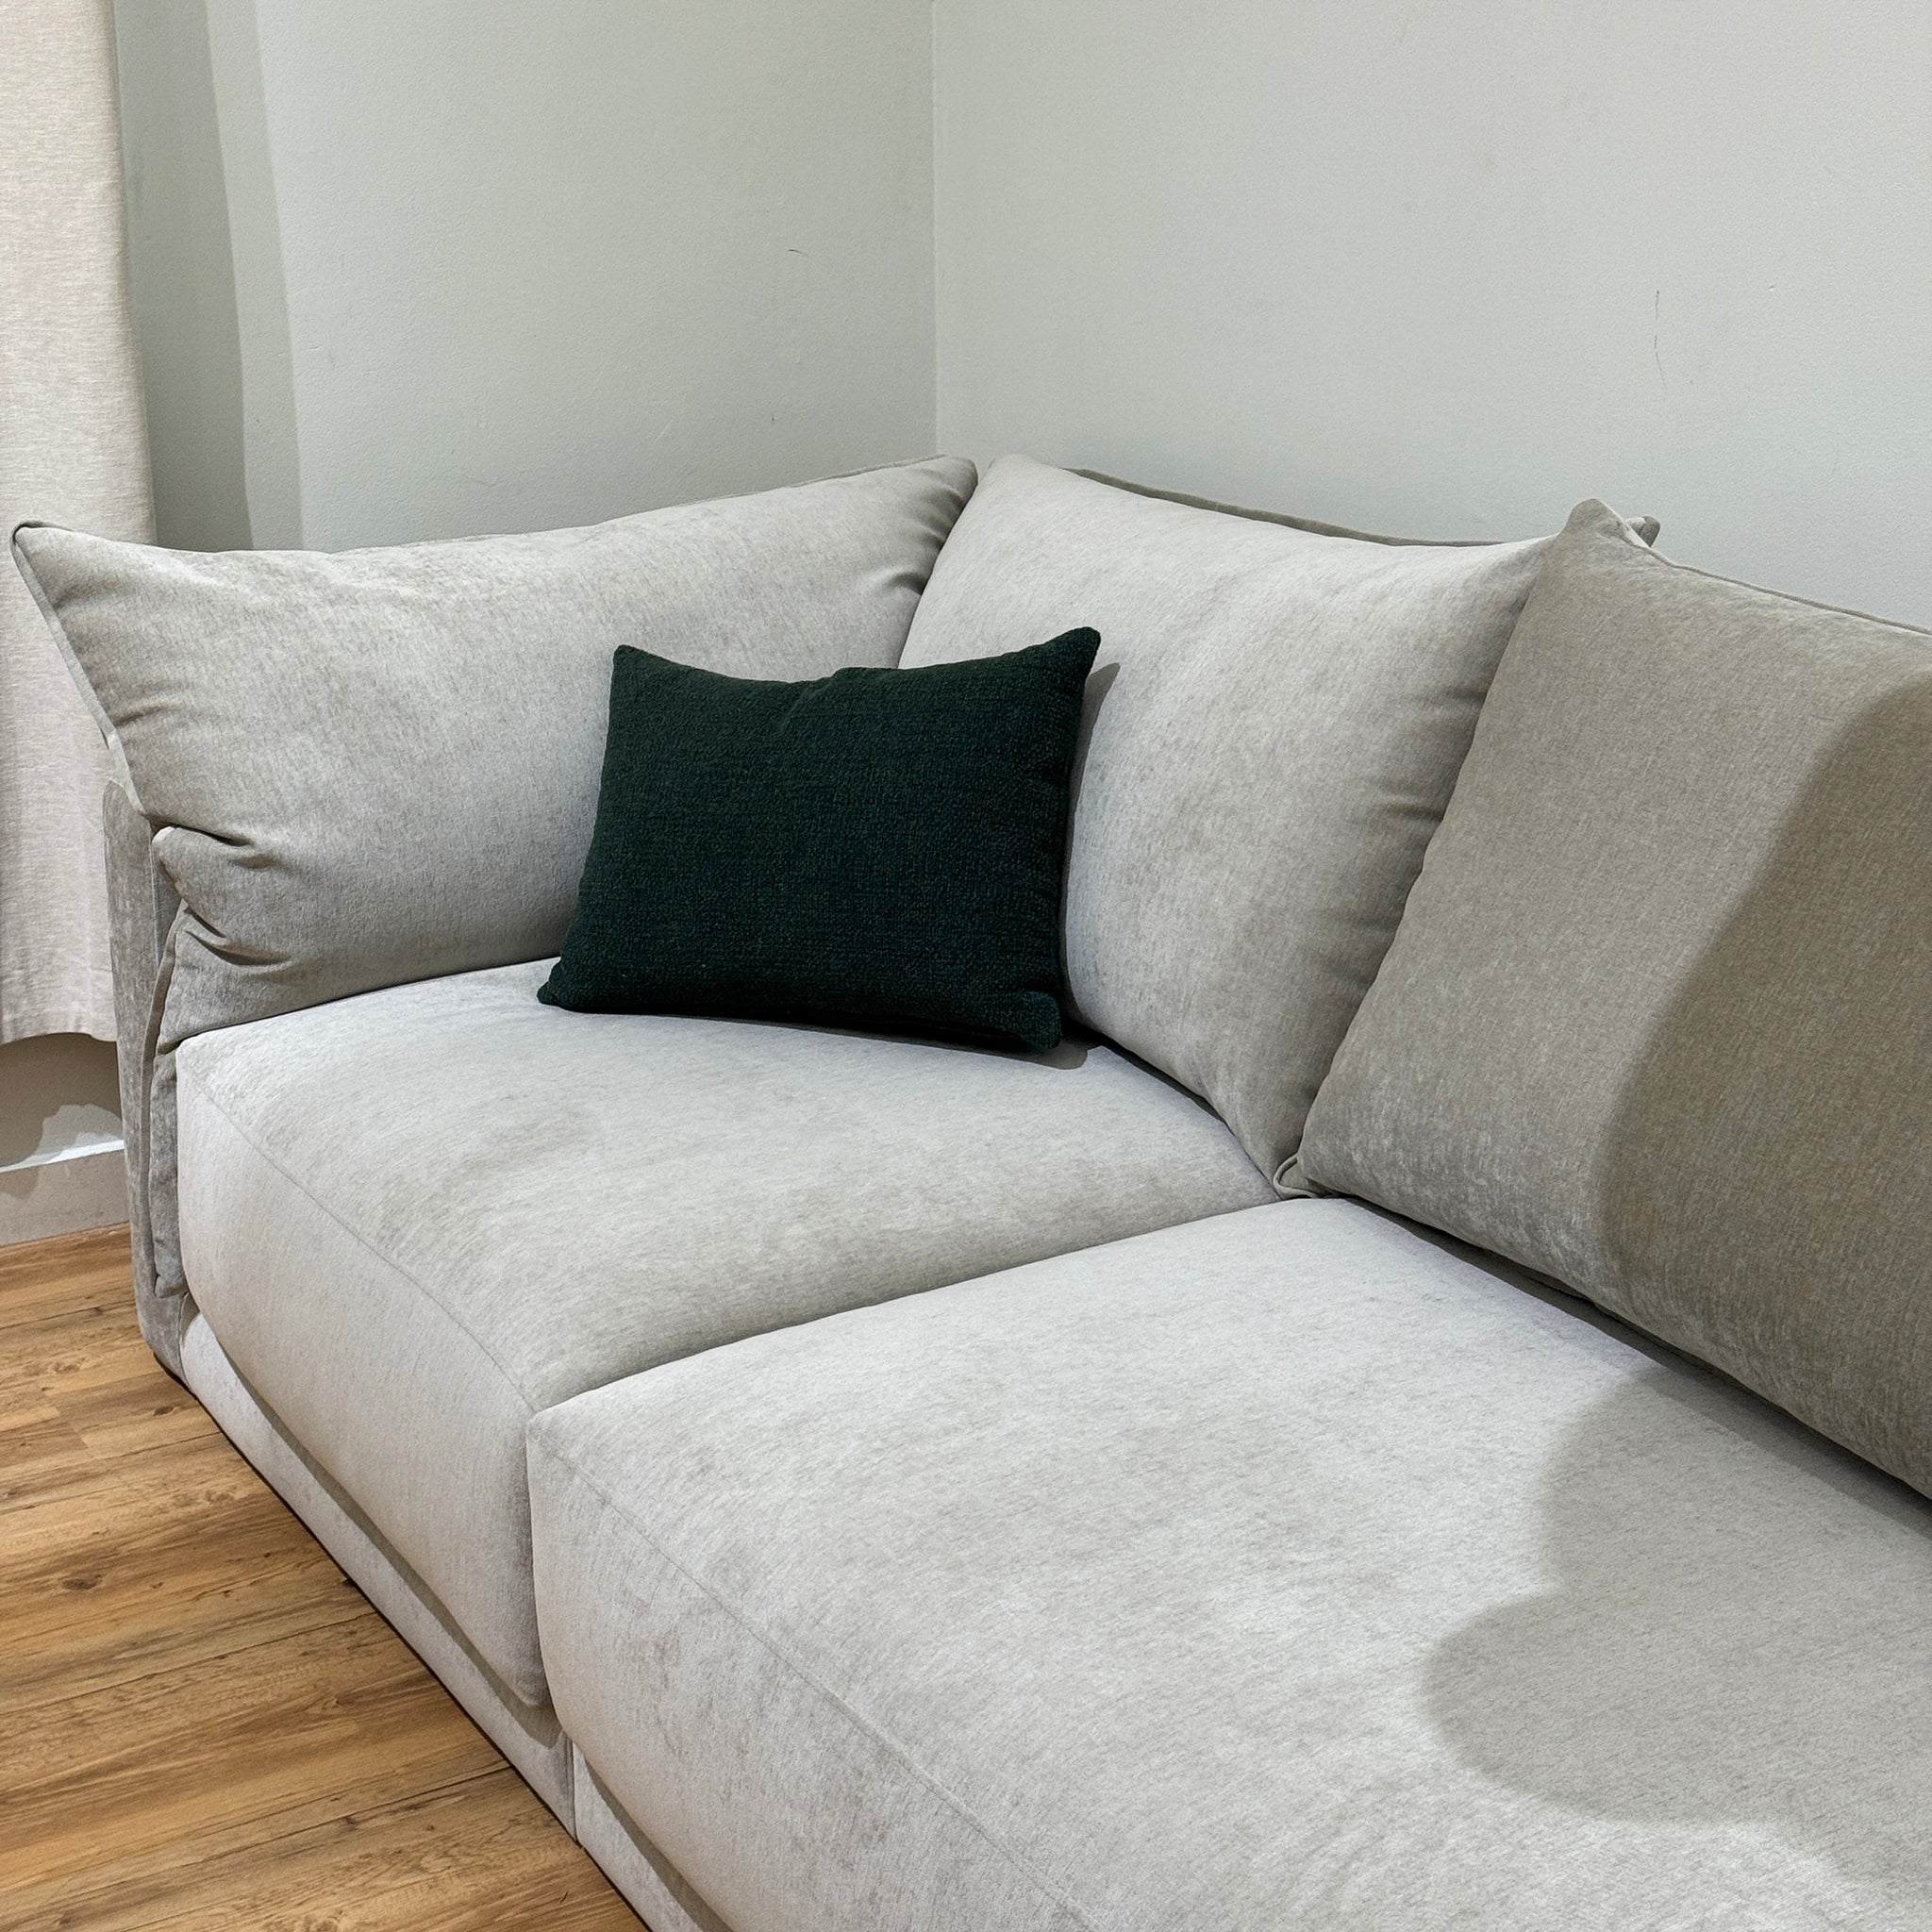 Gray plush Constance sofa in living room with wooden floor adds comfort and style